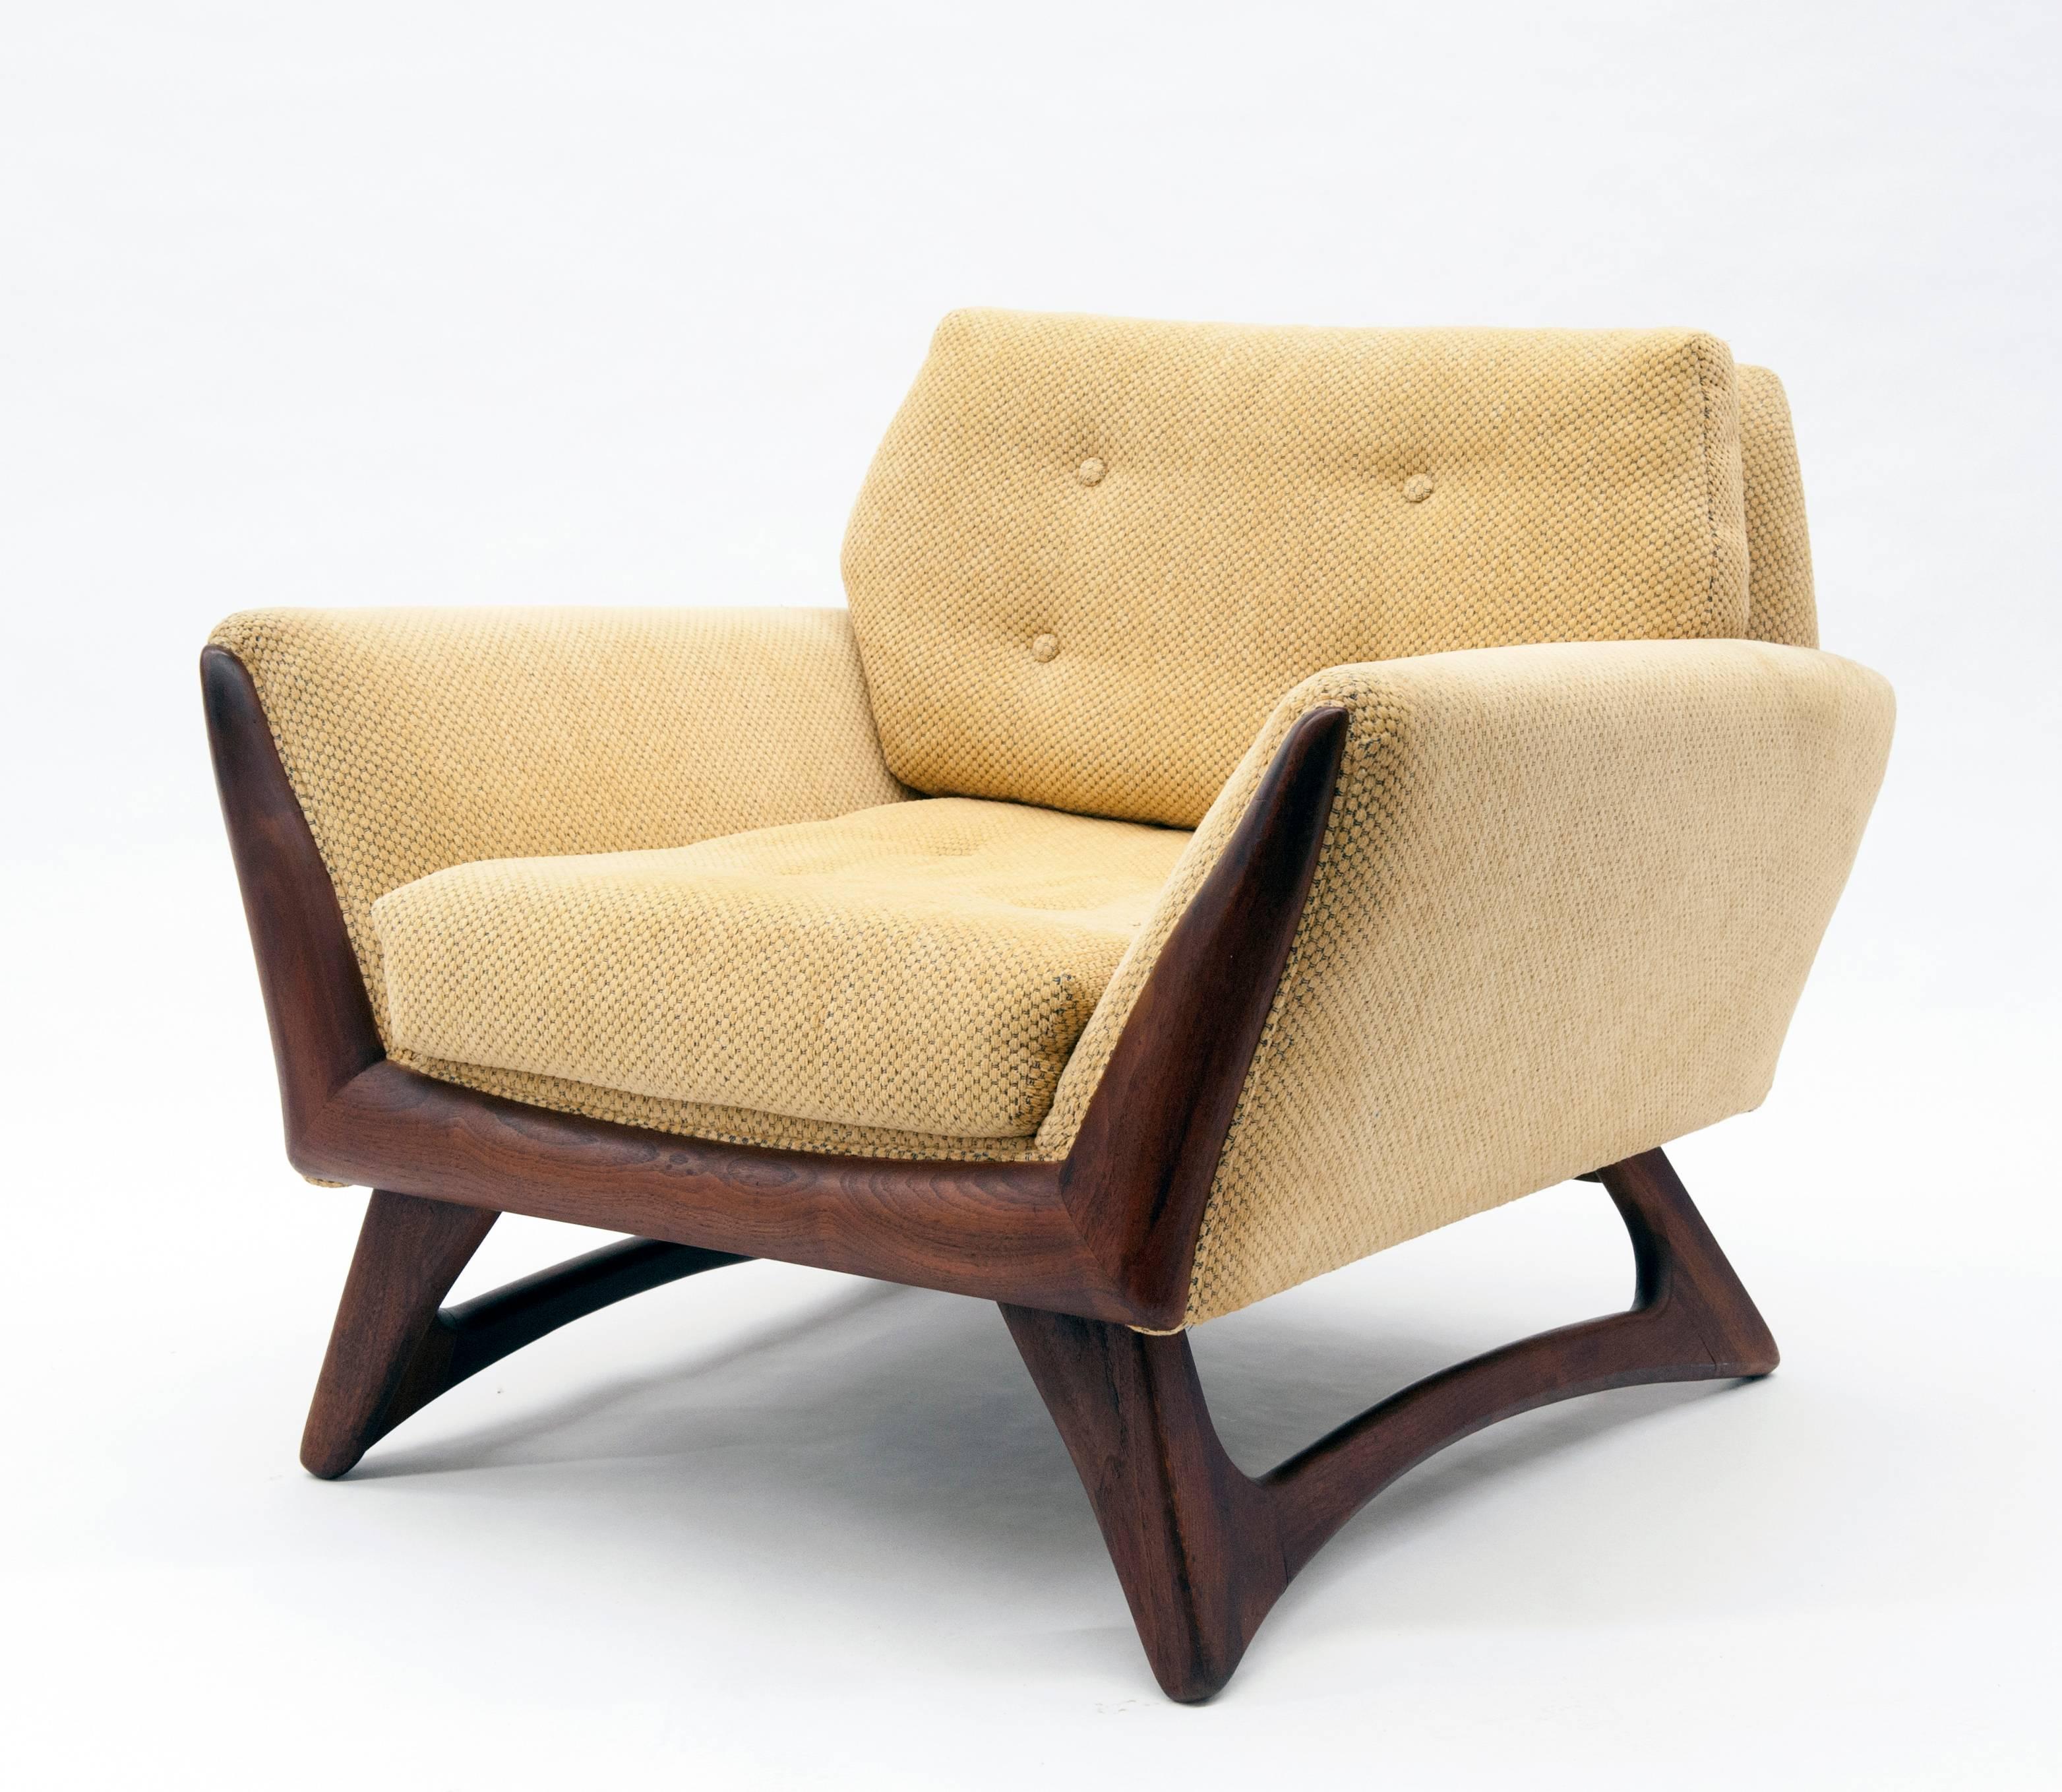 Hard to find Adrian Pearsall lounge chair with sculptural wood base and trim. Chair is very solid and comfortable and looks great from every direction. This is an original Pearsall design and chair dates to 1965. Wood trim and base is in excellent